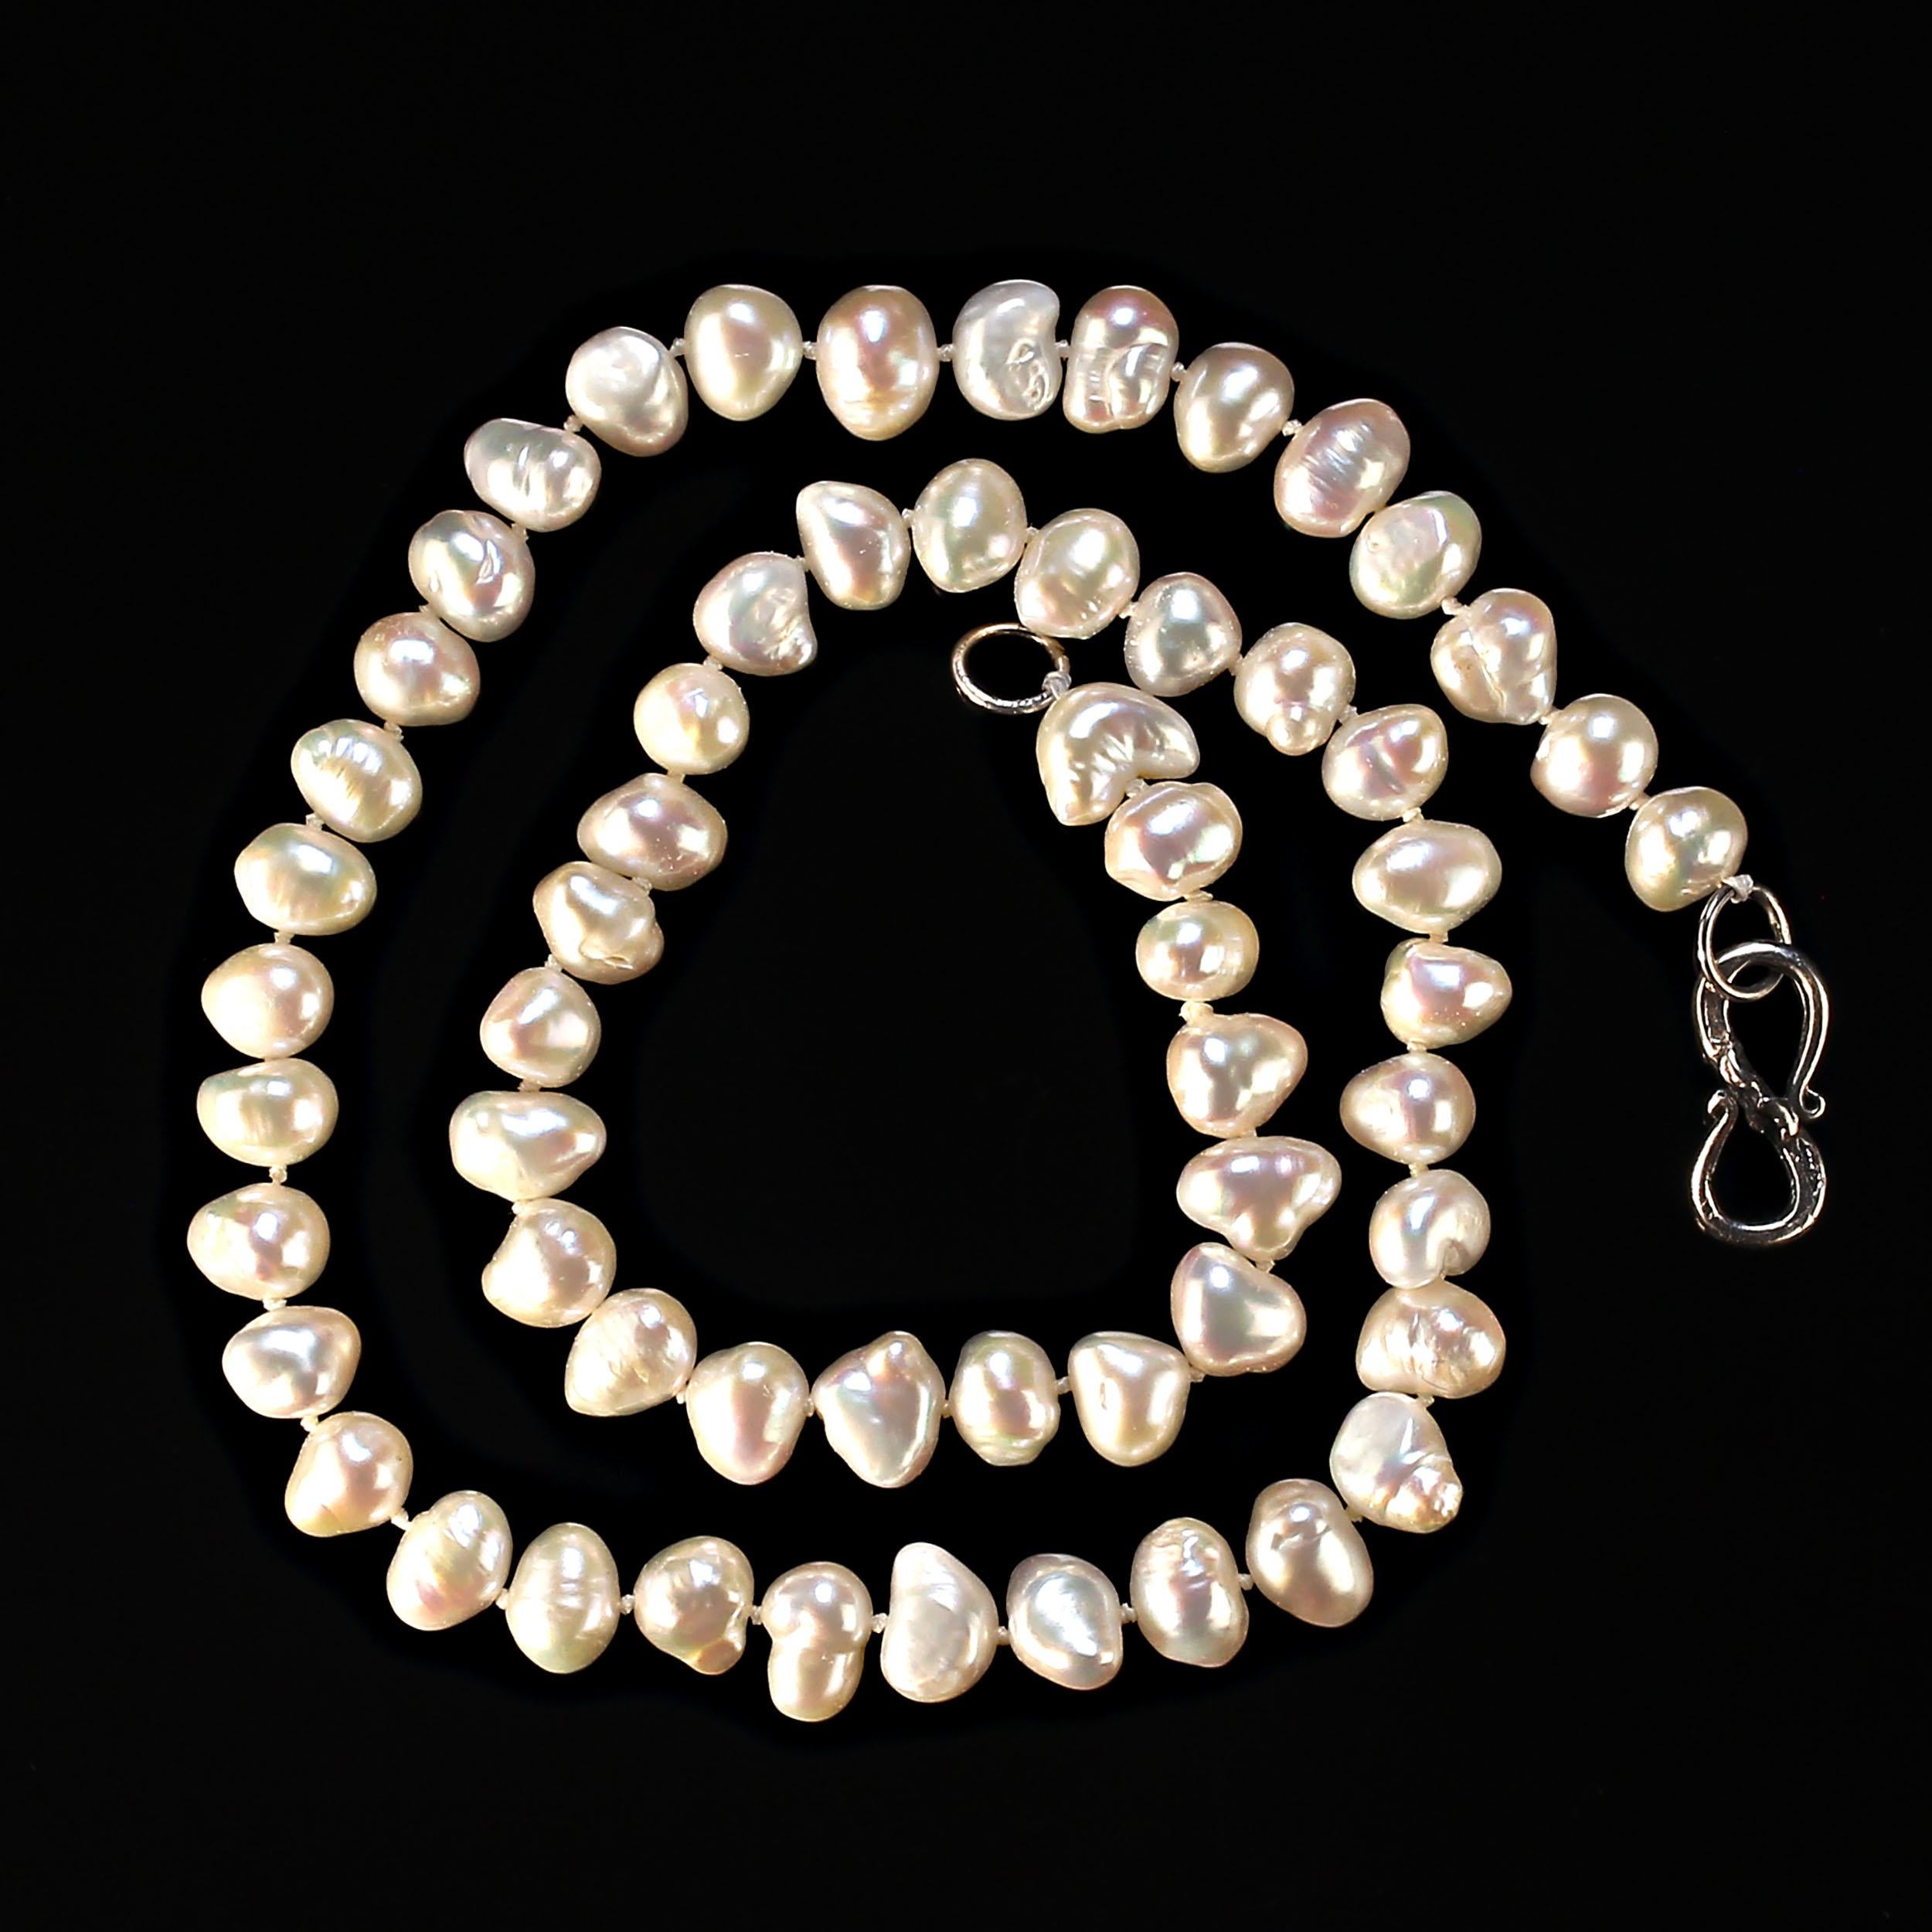 Bead AJD Perfect Pearl 17 Inch creamy white necklace   Perfect Gift! For Sale